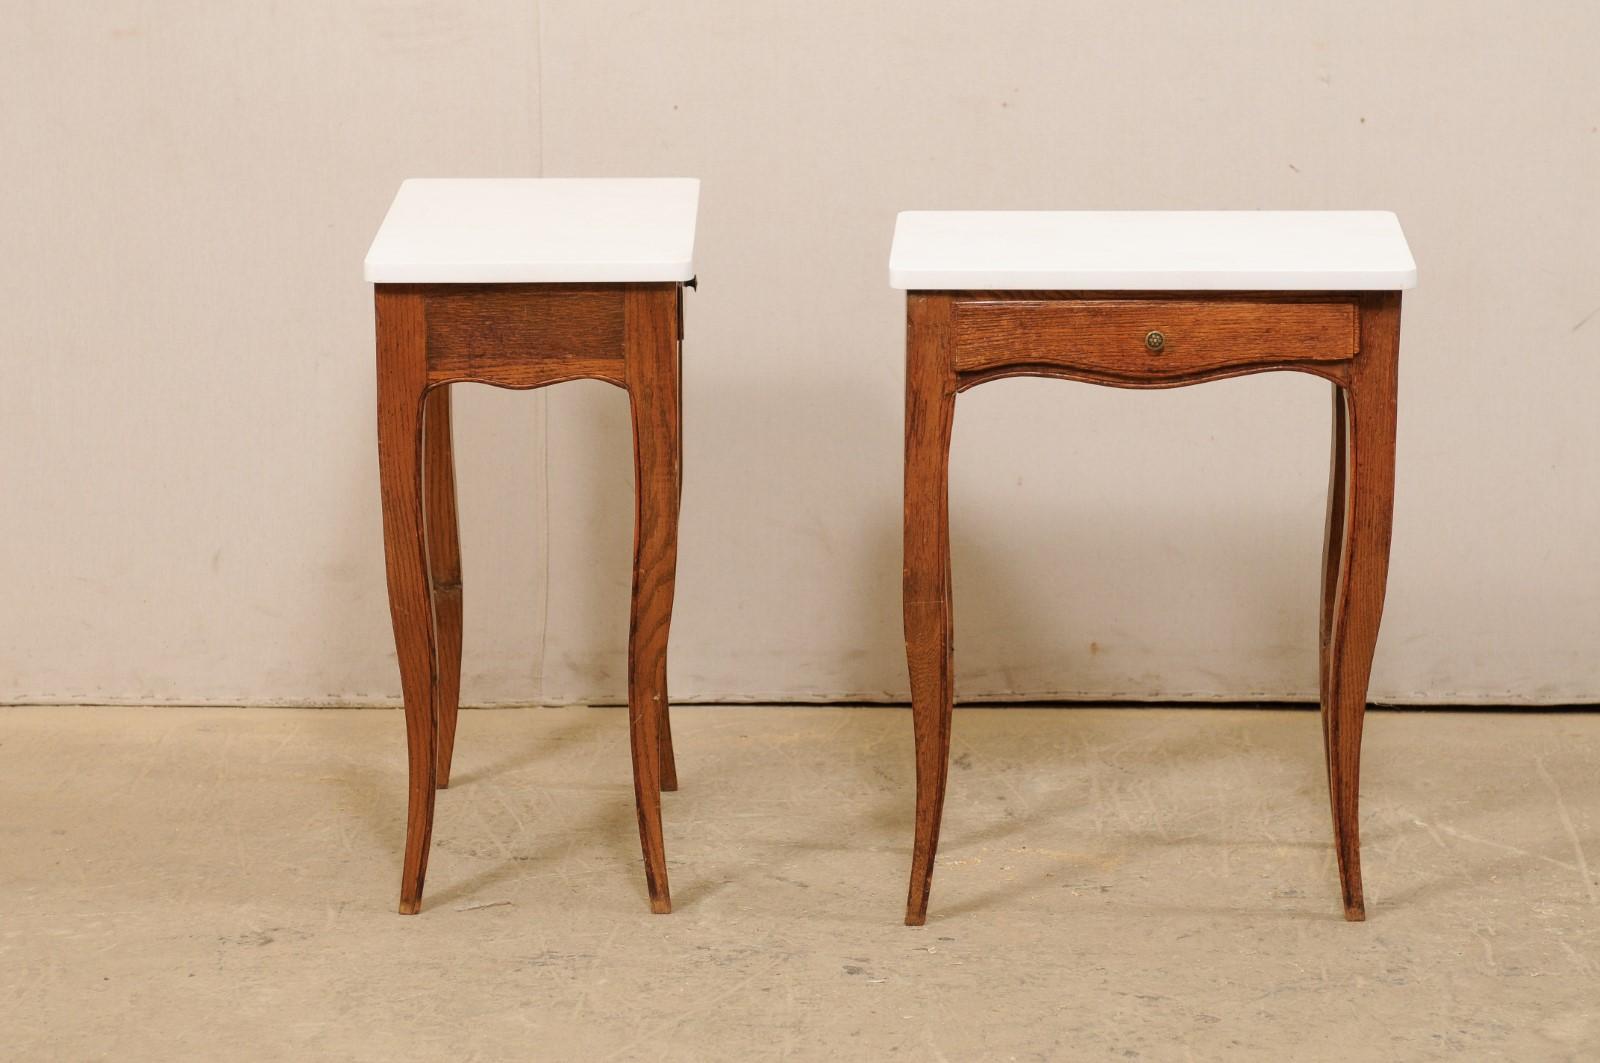 Pair of 1920s French Single-Drawer Side Tables with New White Quartz Tops For Sale 2